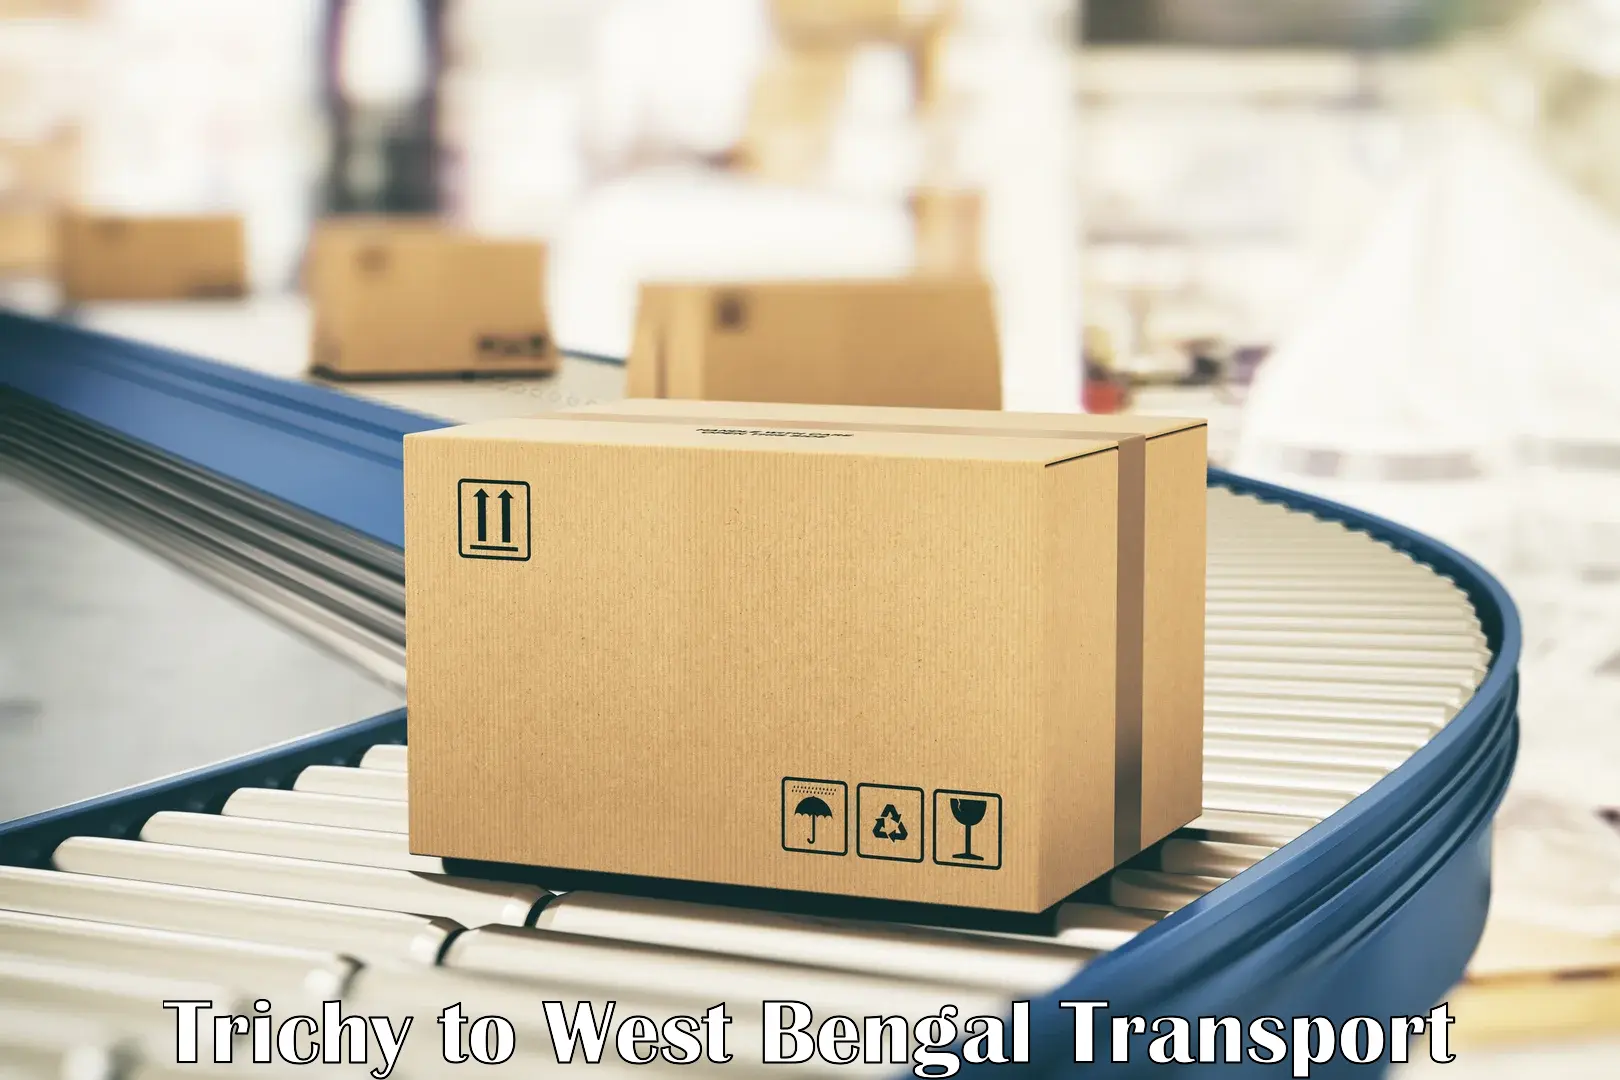 Online transport booking Trichy to West Bengal